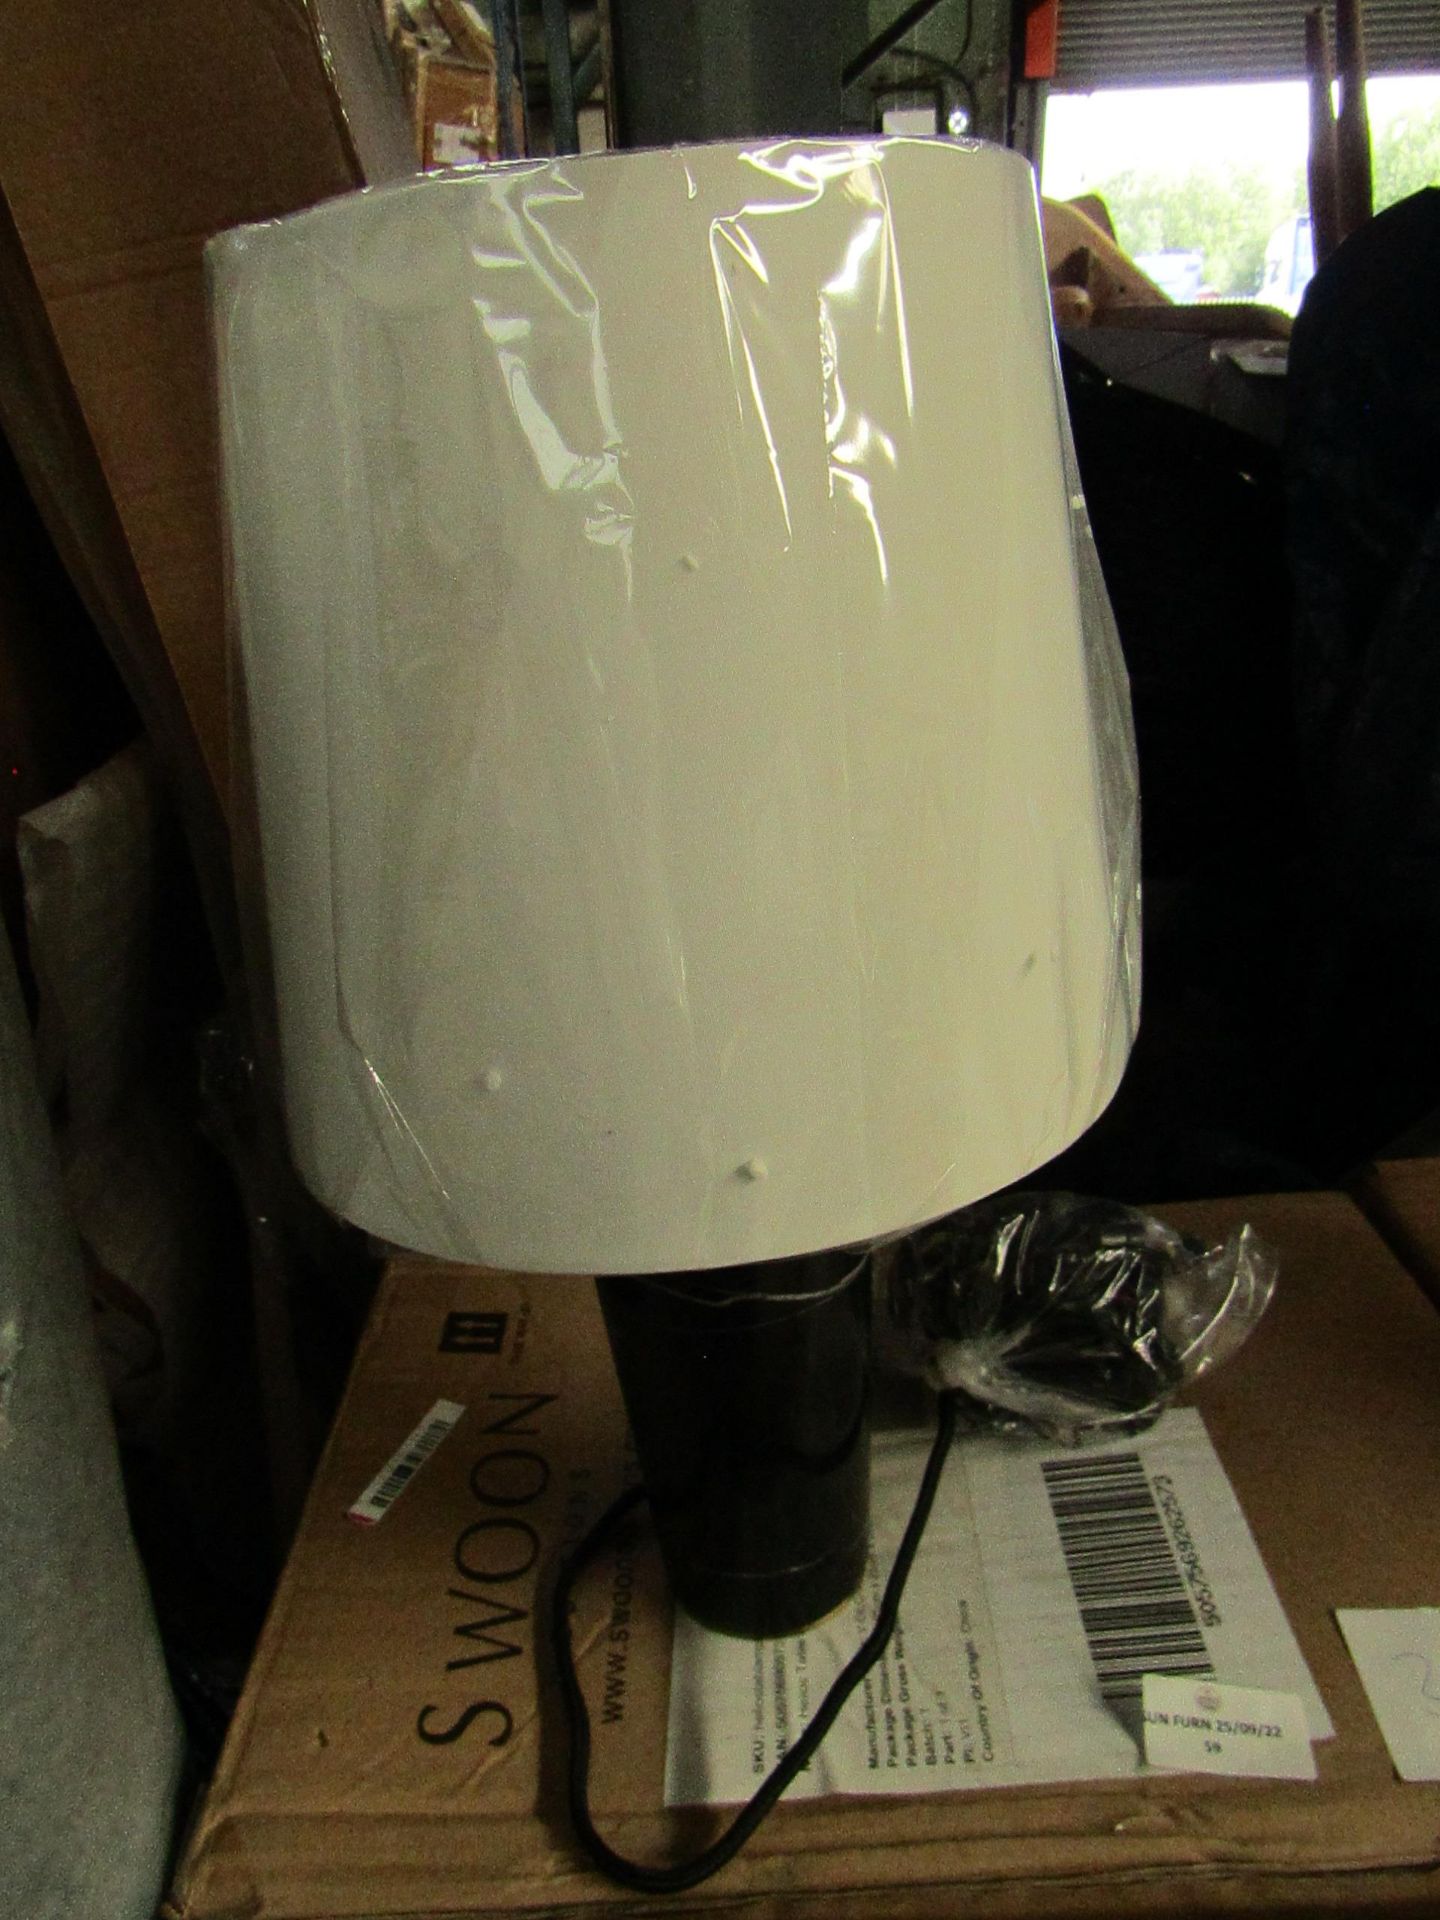 Swoon Helios Table Lamp in Black Marble - Good Condition & Boxed - RRP £69